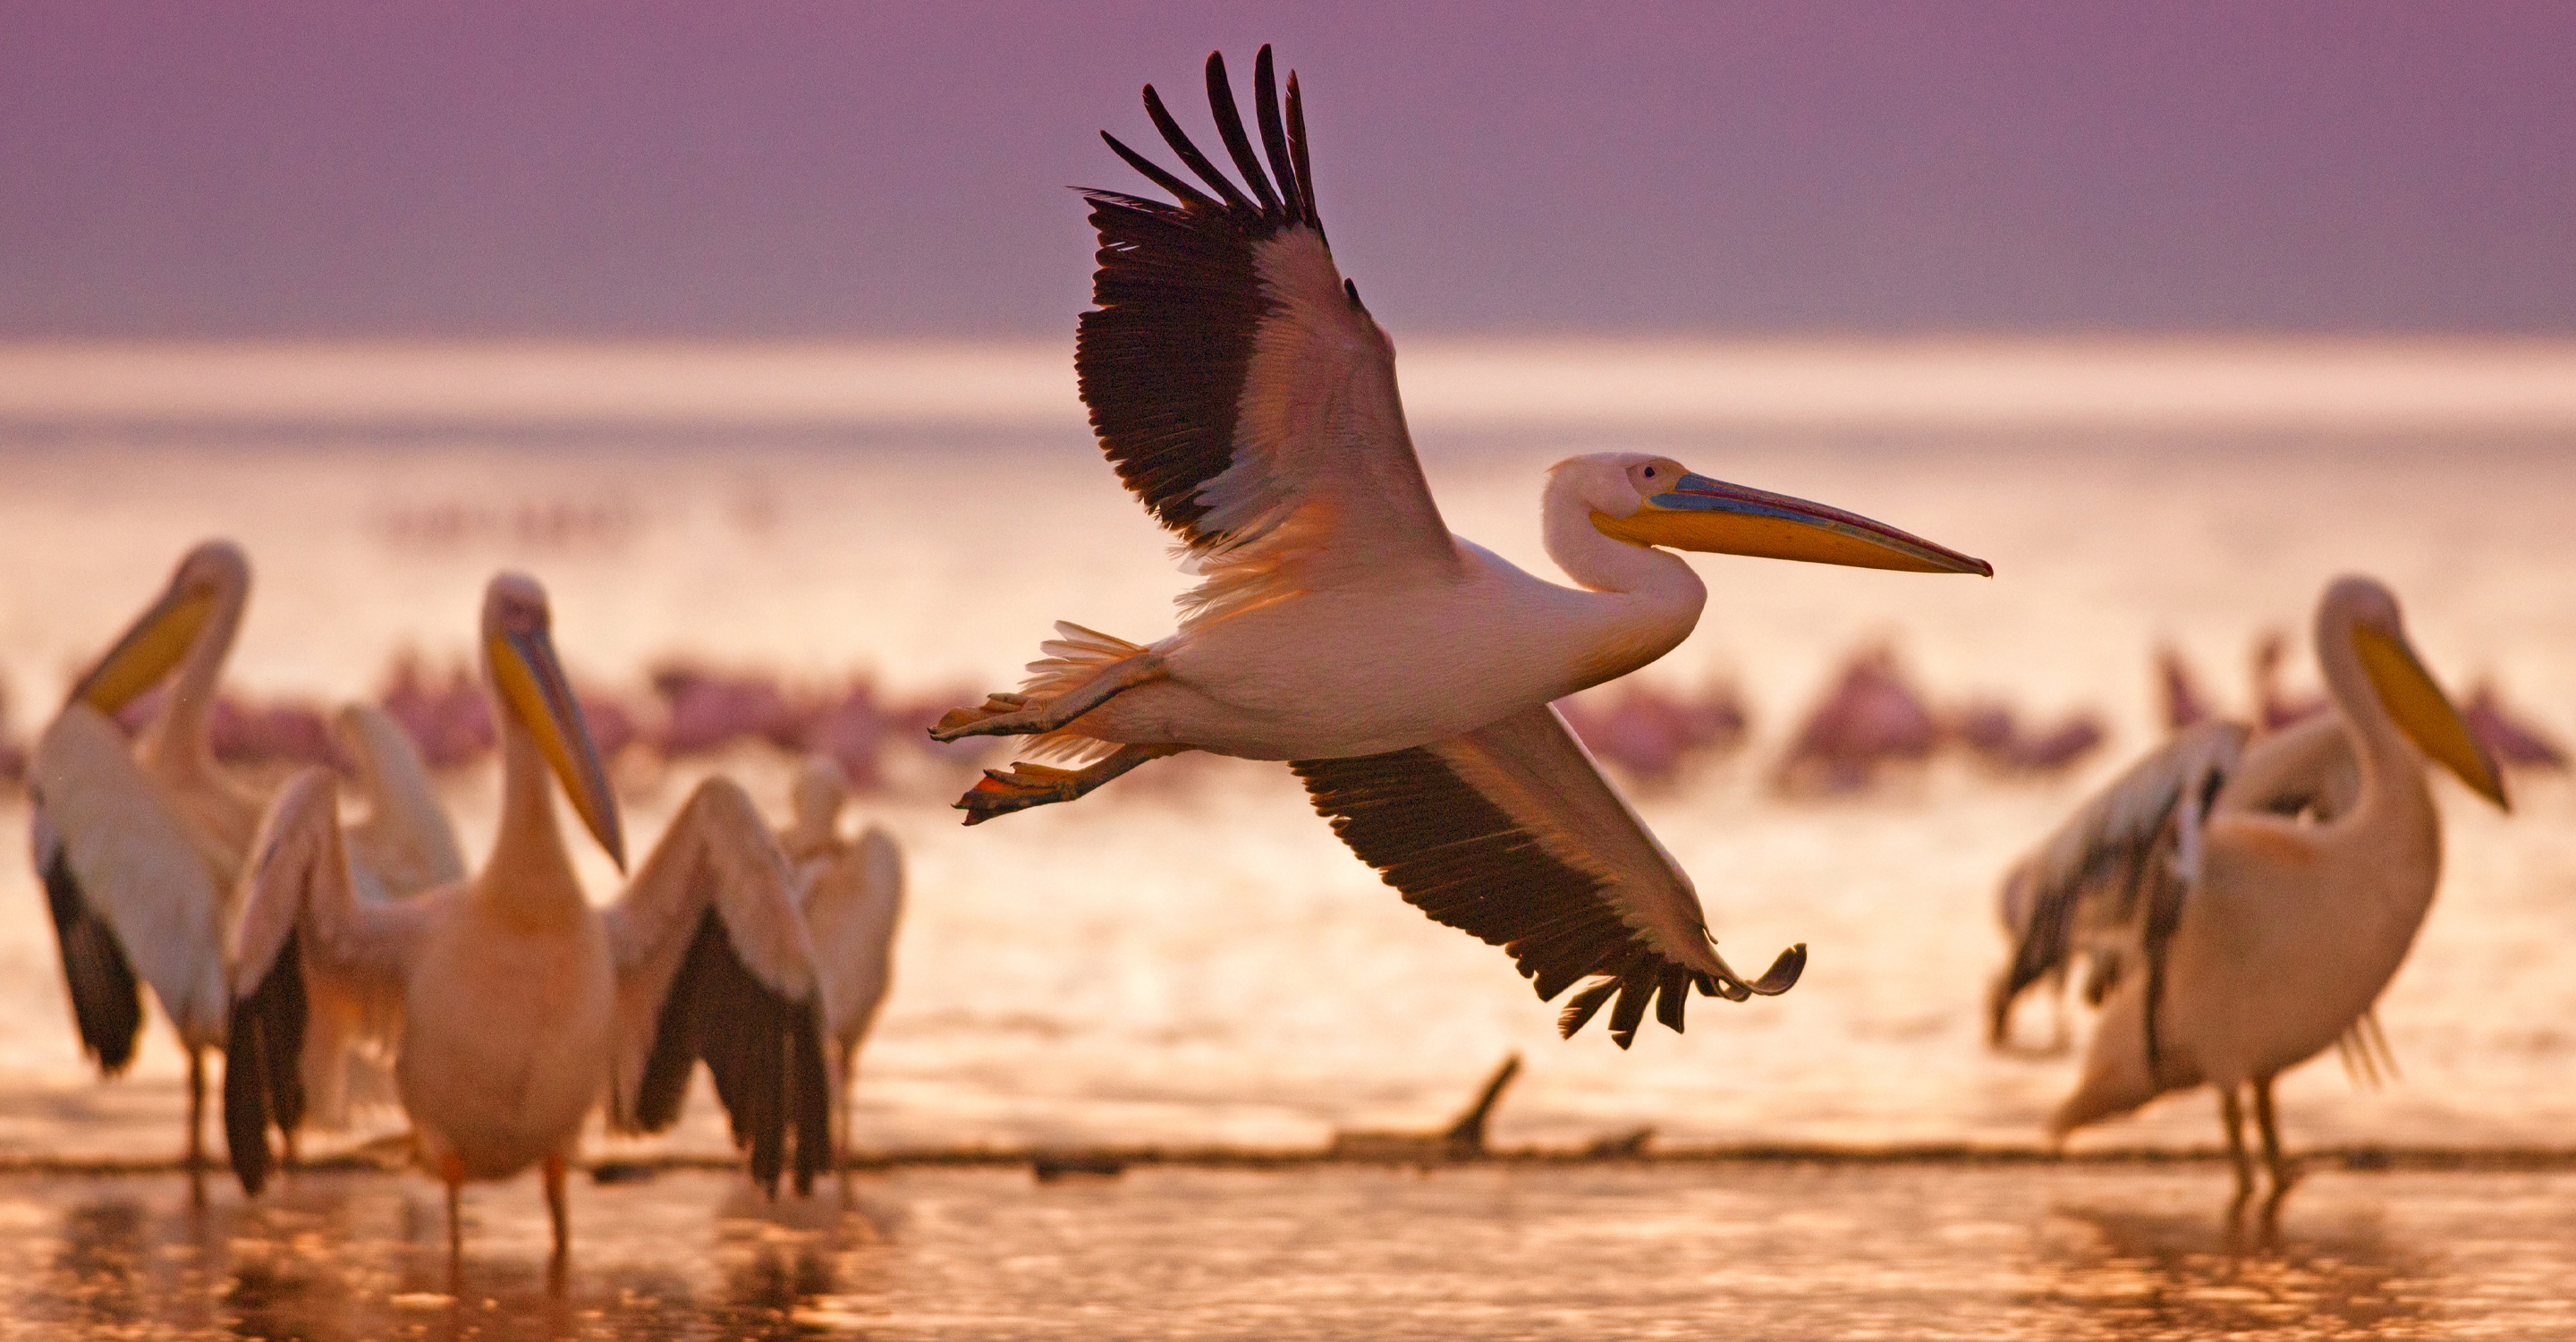 A pelican takes flight at a waterhole at sunset